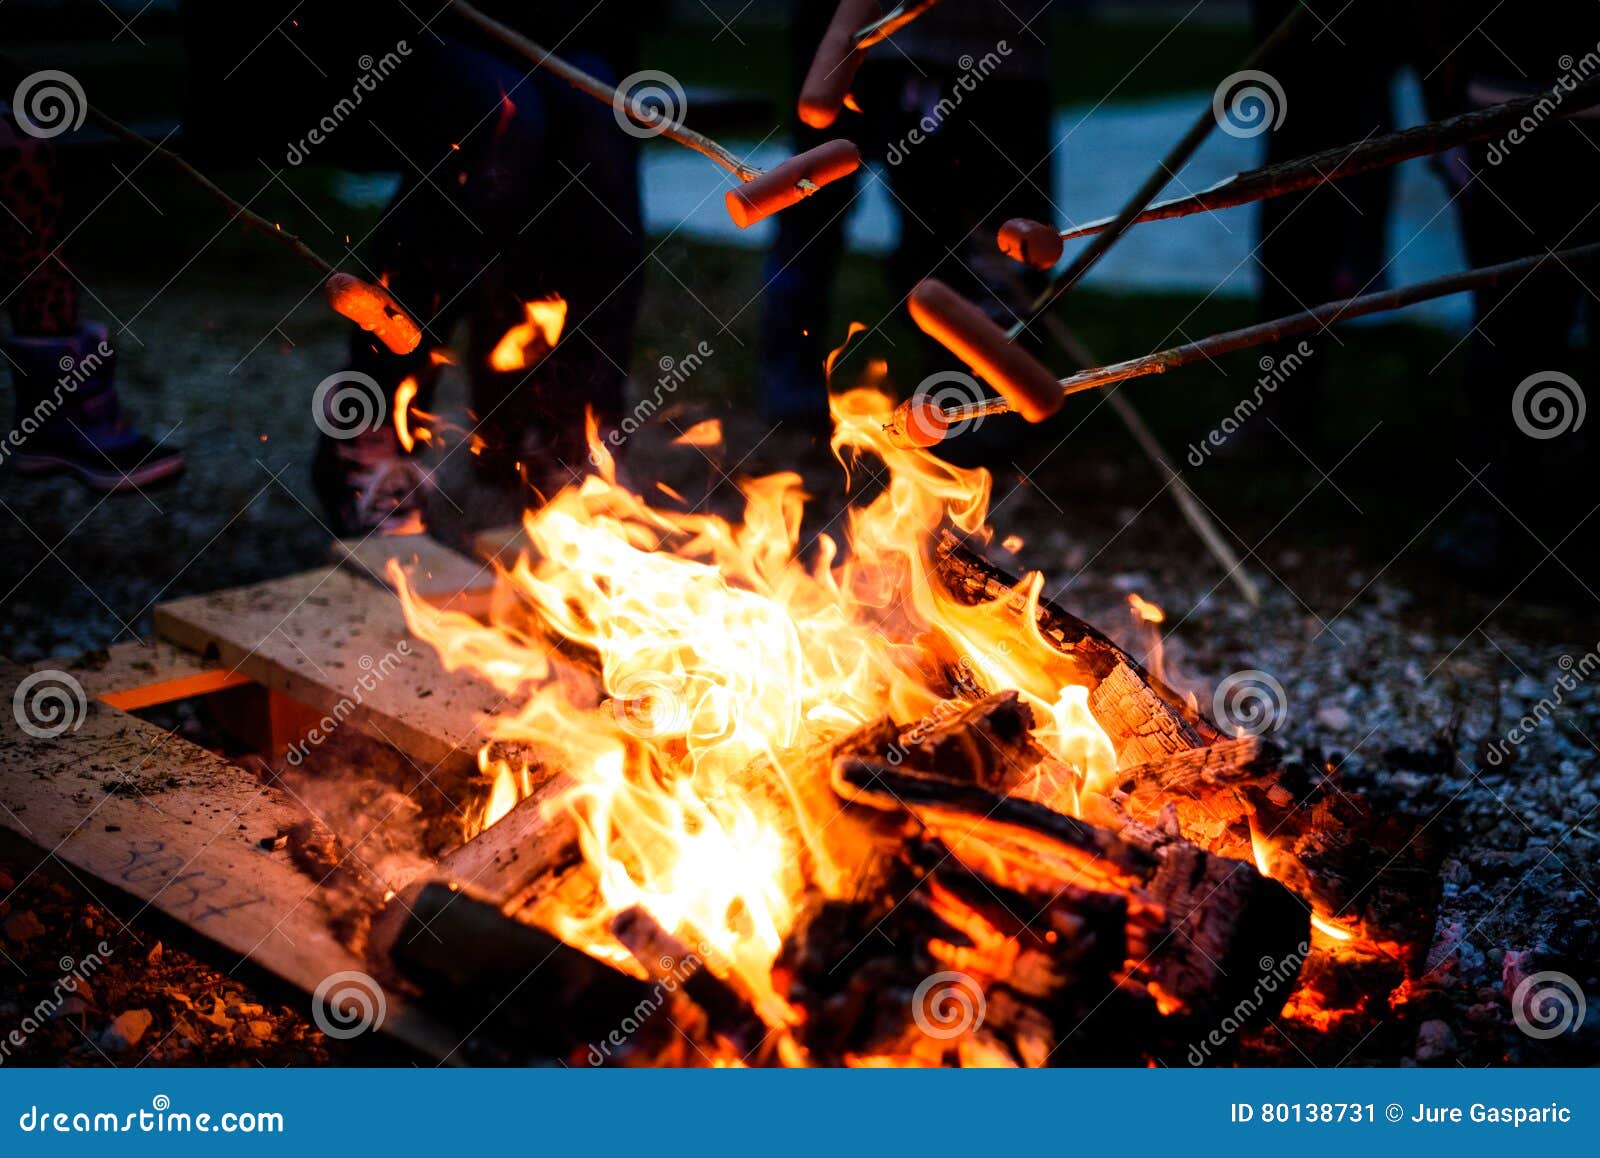 Making and Cooking Hot Dog Sausages Over Open Camp Fire. Stock Image ...